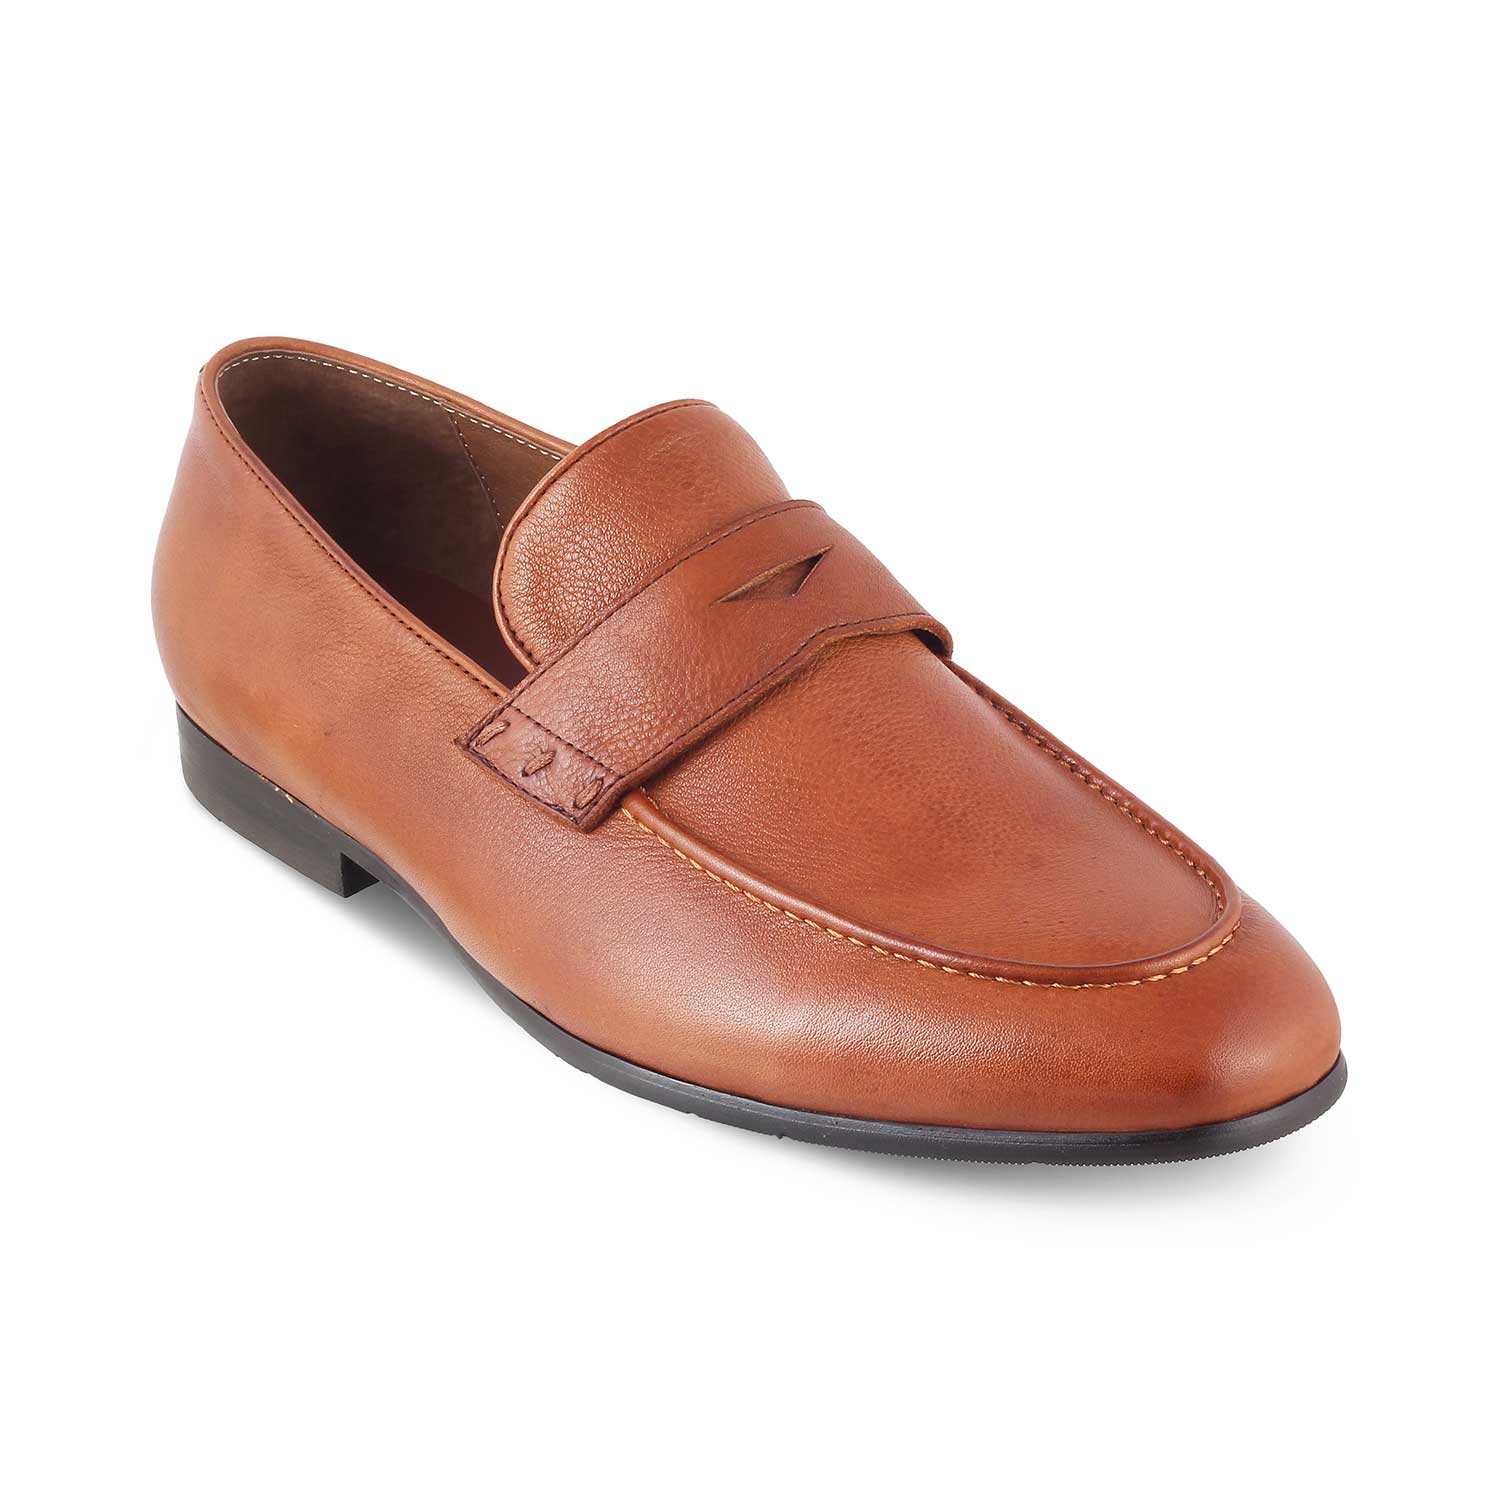 The Douce Tan Men's Leather Penny Loafers Tresmode - Tresmode